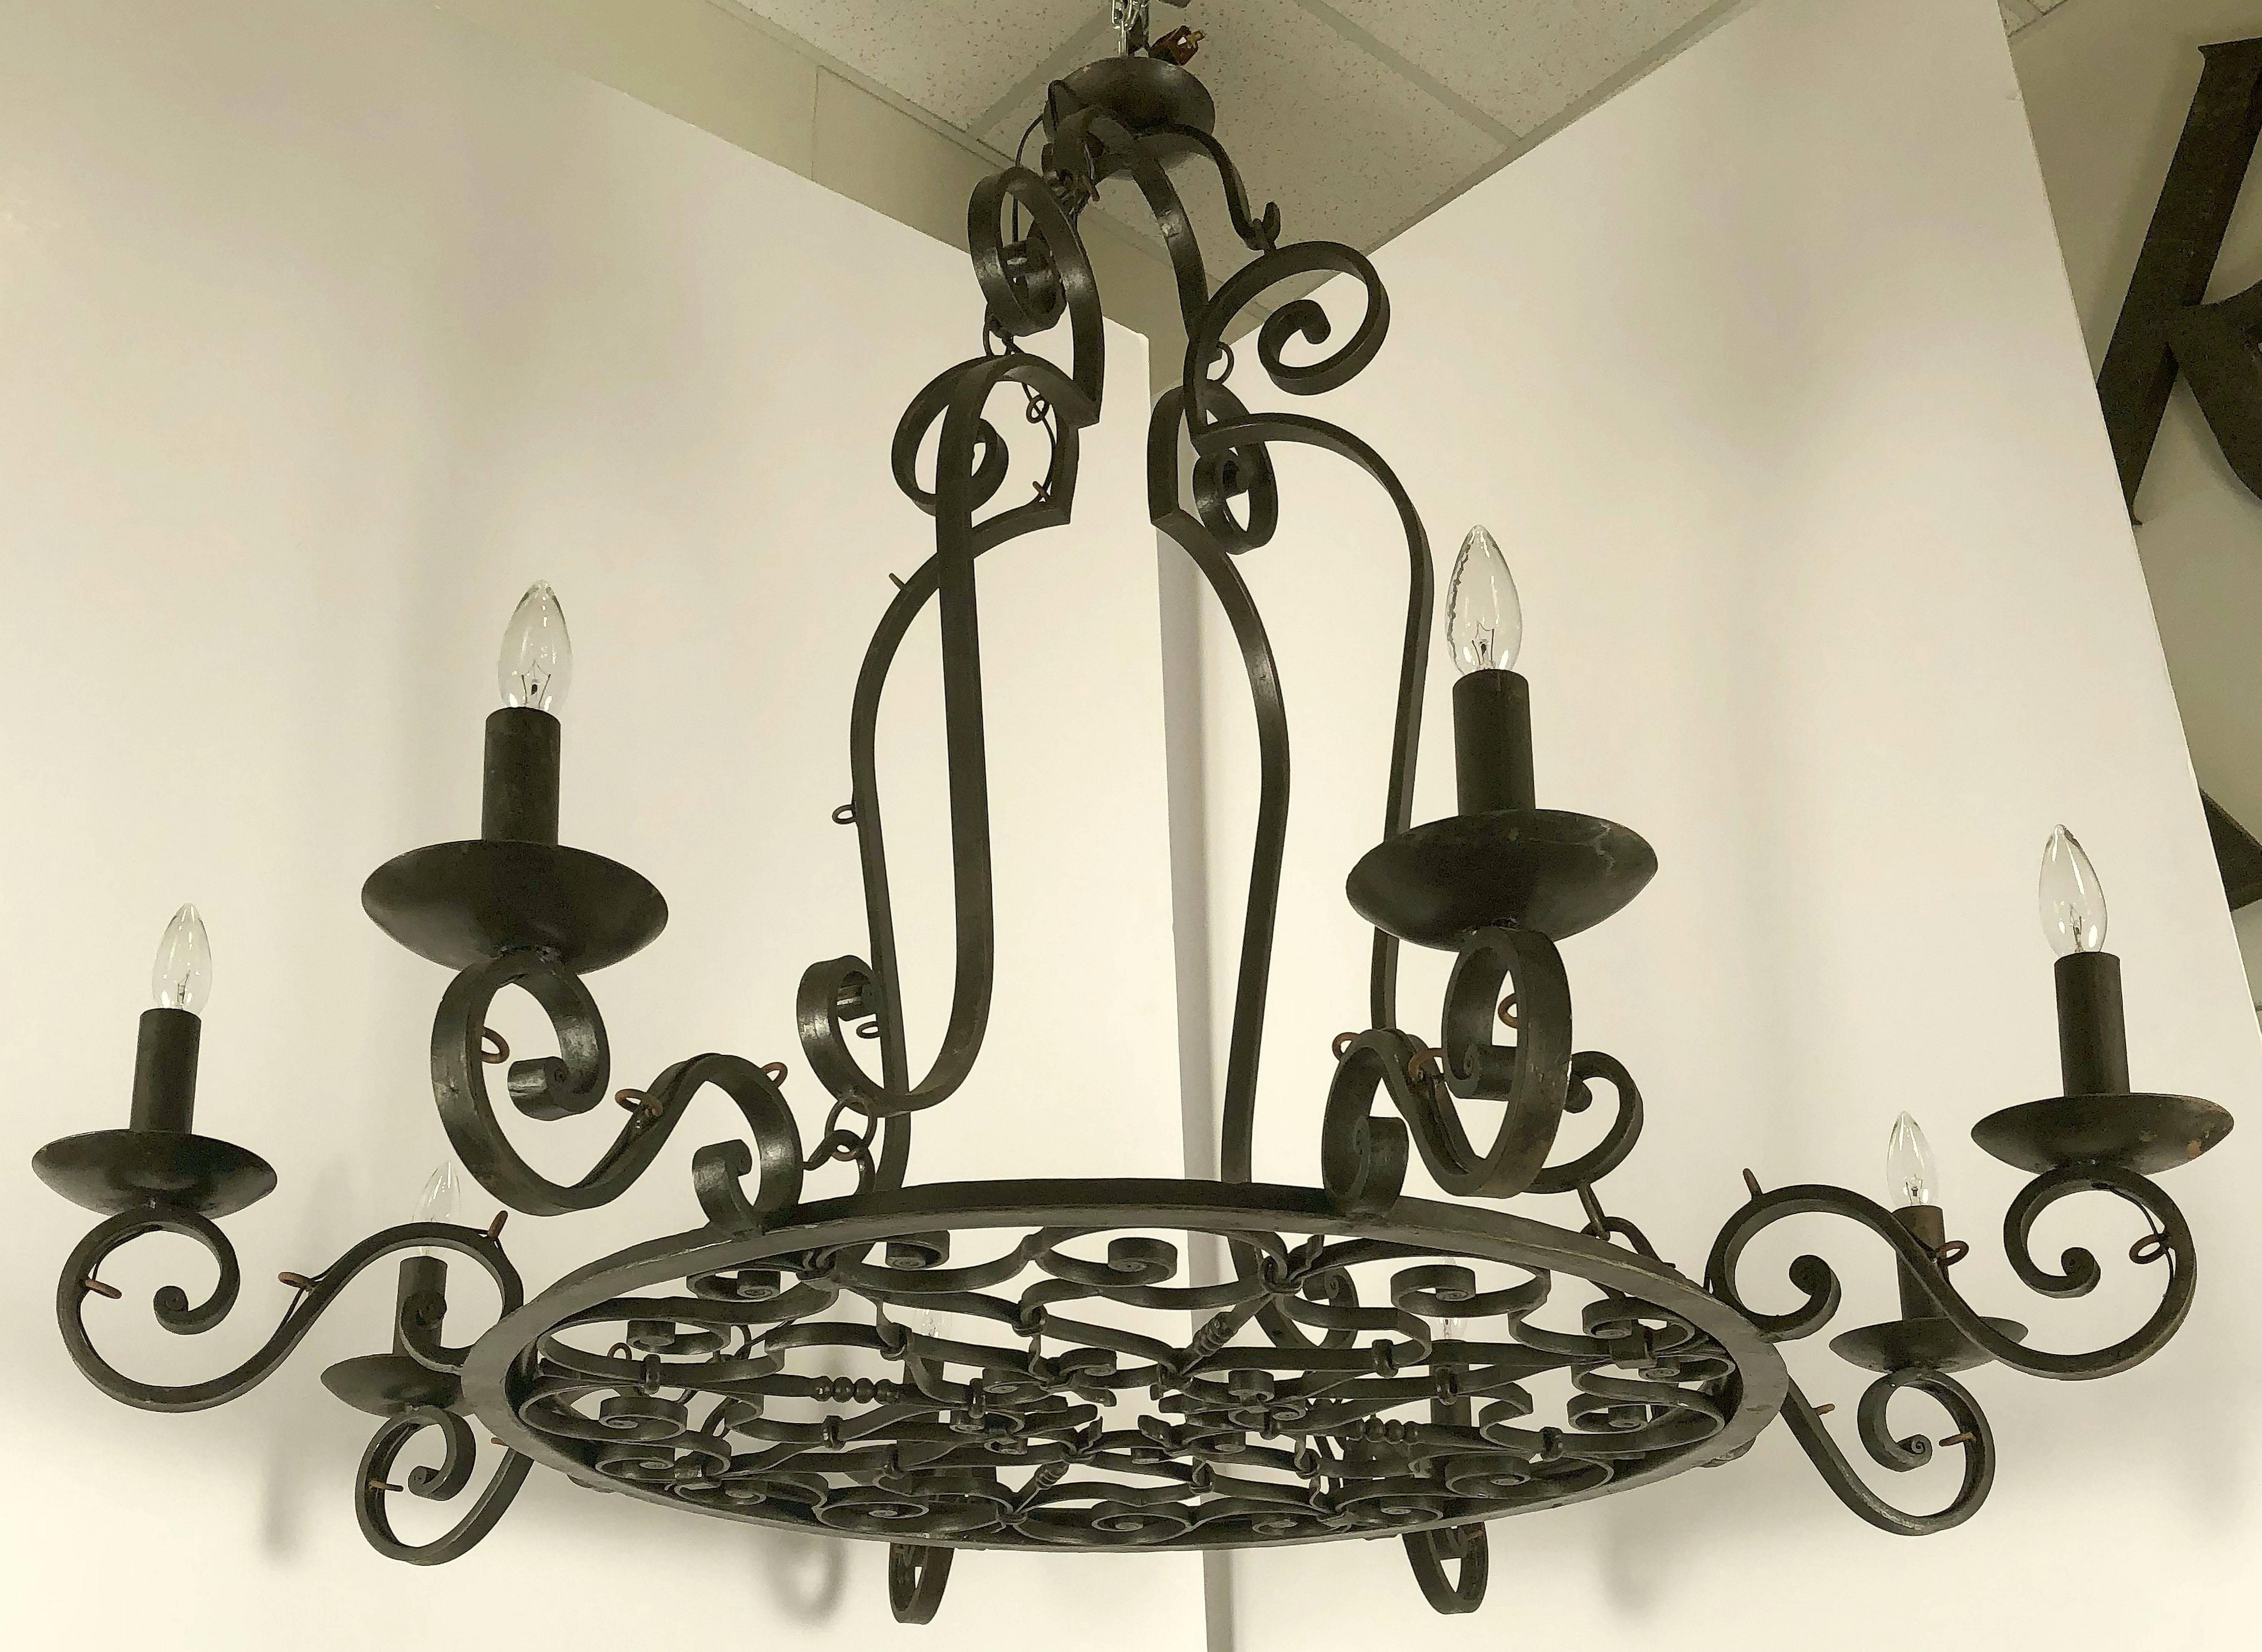 A large eight-light chandelier or hanging fixture of wrought iron, featuring a circular body issuing eight serpentine arms, each arm holding a large faux candleholder terminating in candelabra light, attached to a top crown by four serpentine